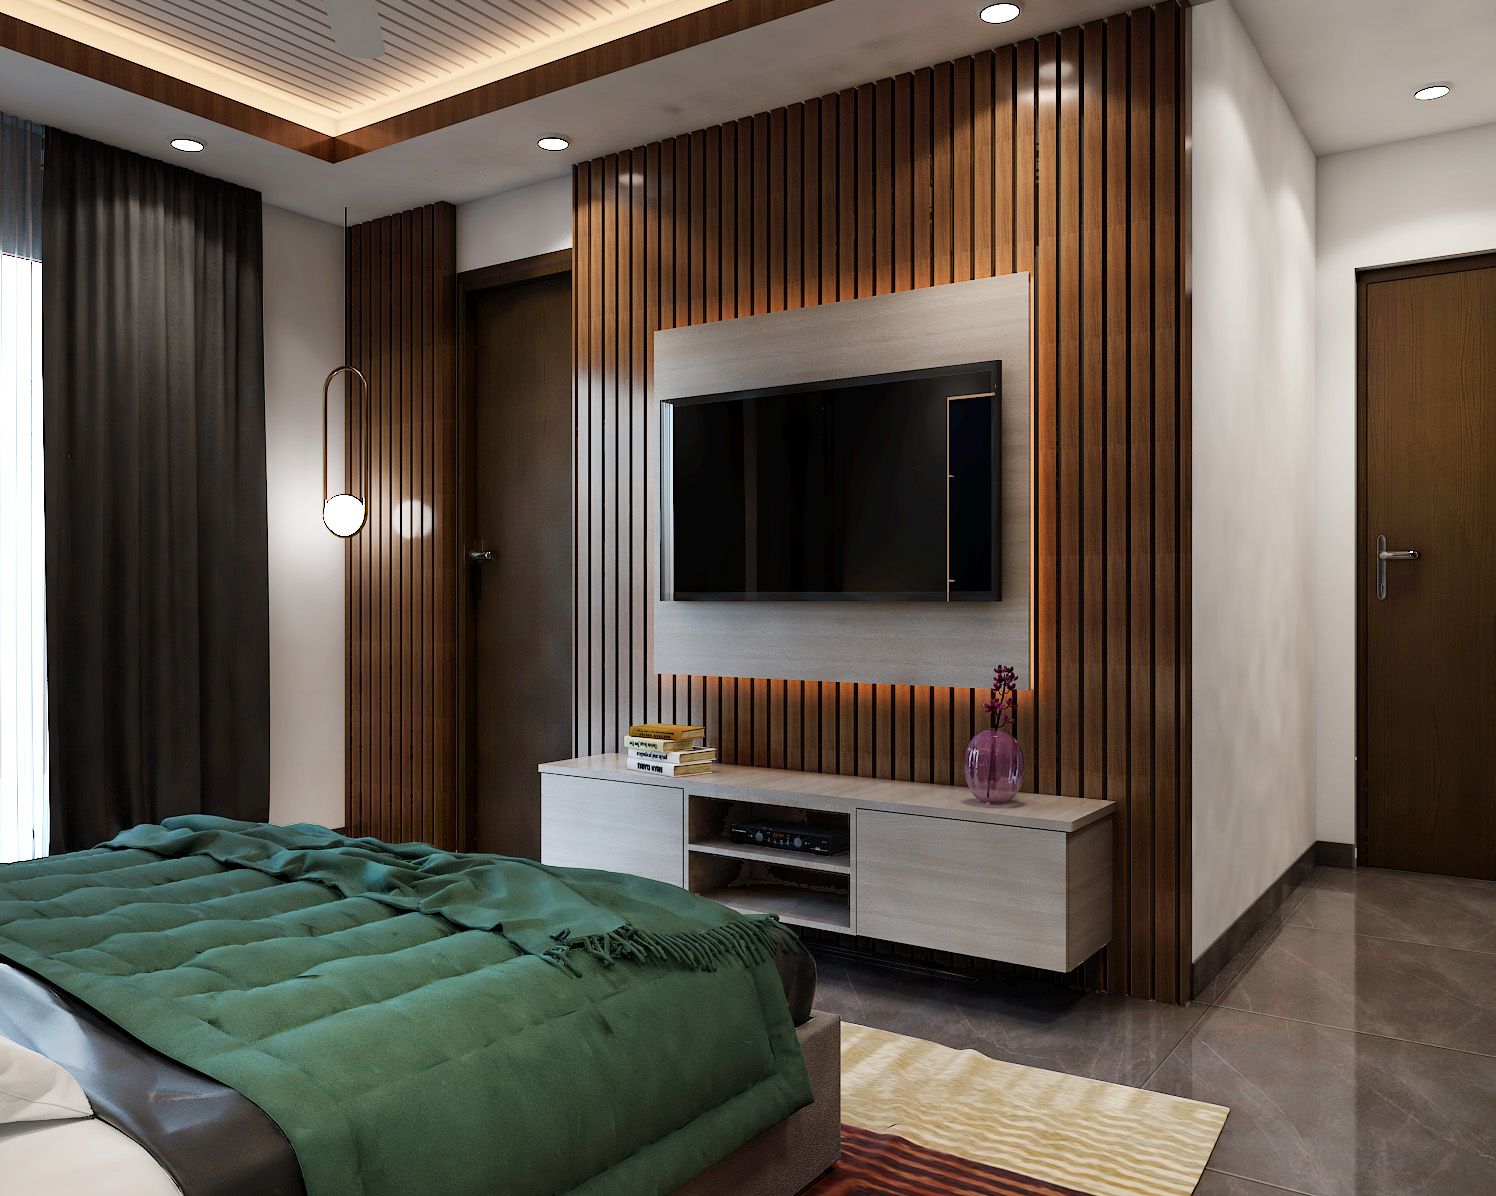 Contemporary Light Wooden Wall-Mounted TV Unit Design With Wooden Wall Panels